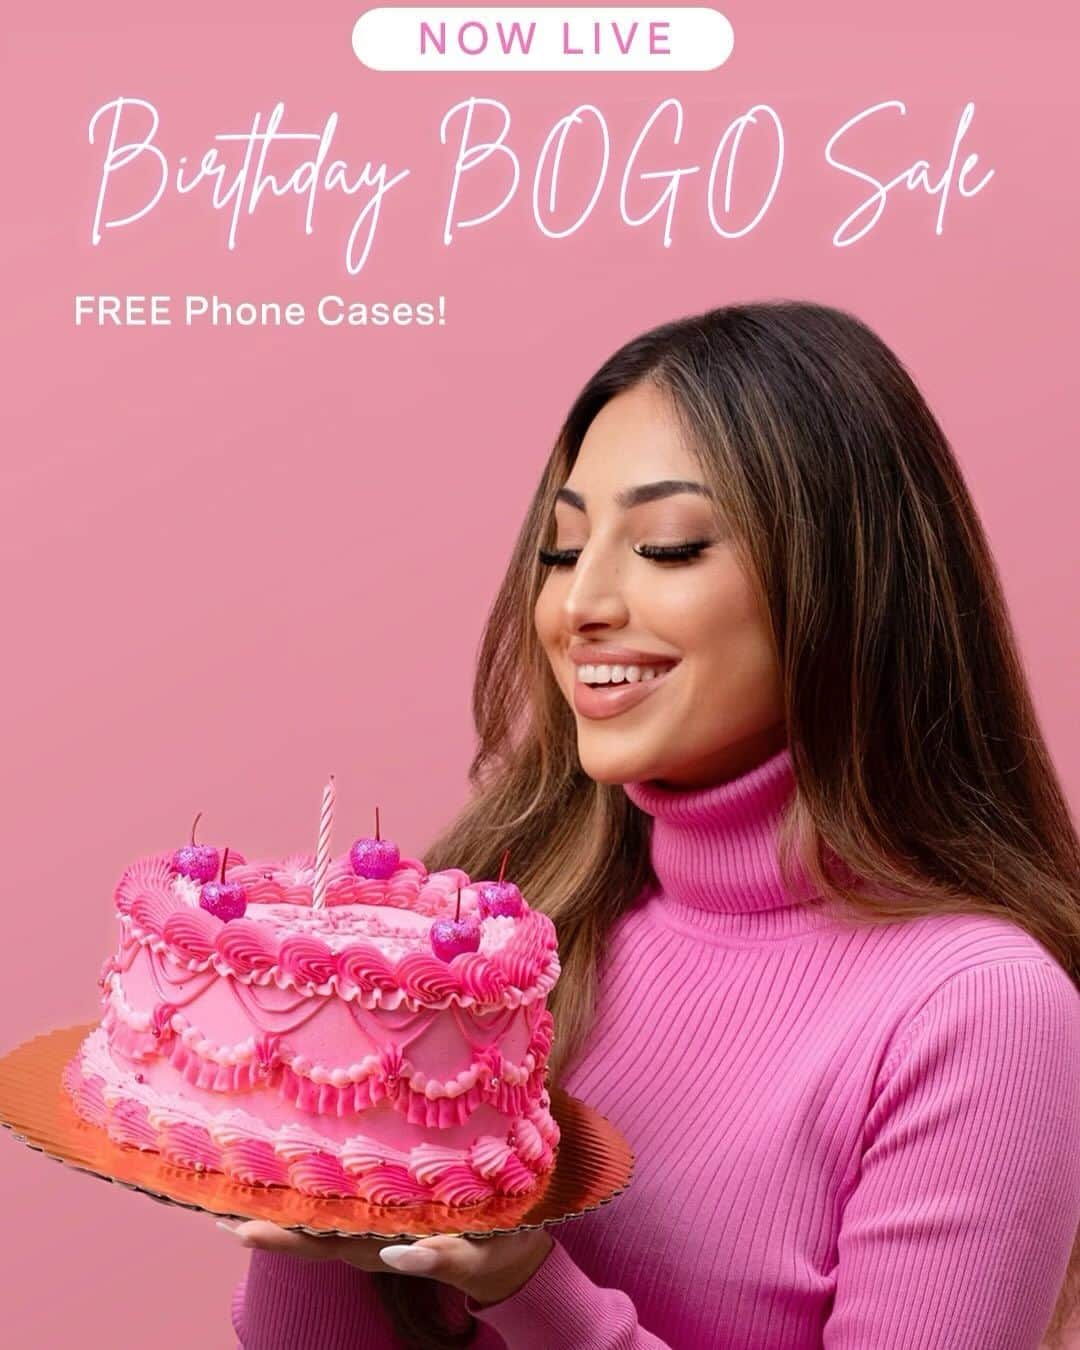 VELVETCAVIARのインスタグラム：「It's her birthday and she'll give away Phone Cases if she wants to! @mishkaran 🥳 🎈  Buy 1 Phone Case Get 1 FREE on Phone Cases, today and tomorrow only.  +FREE Nude Hearts Charms on Orders $60+」